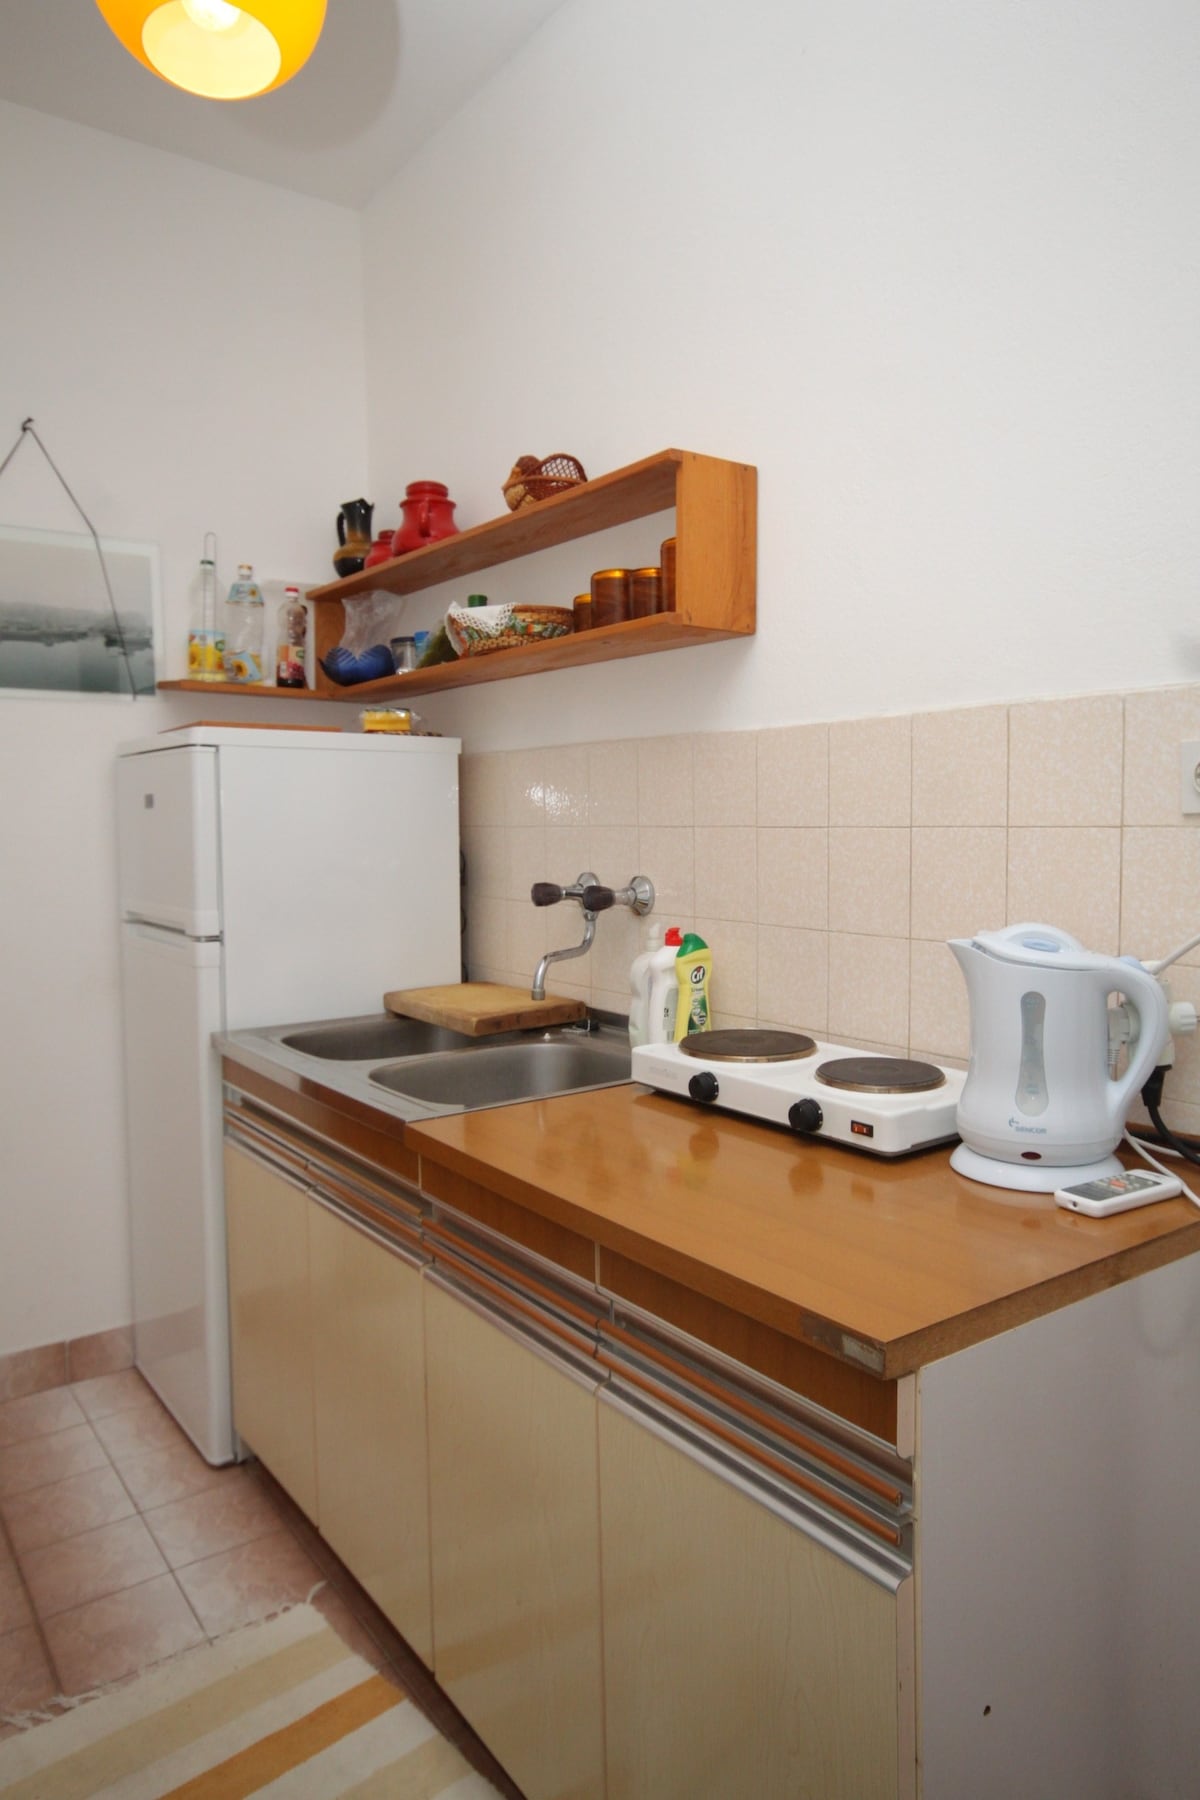 A-8844-b One bedroom apartment with balcony and